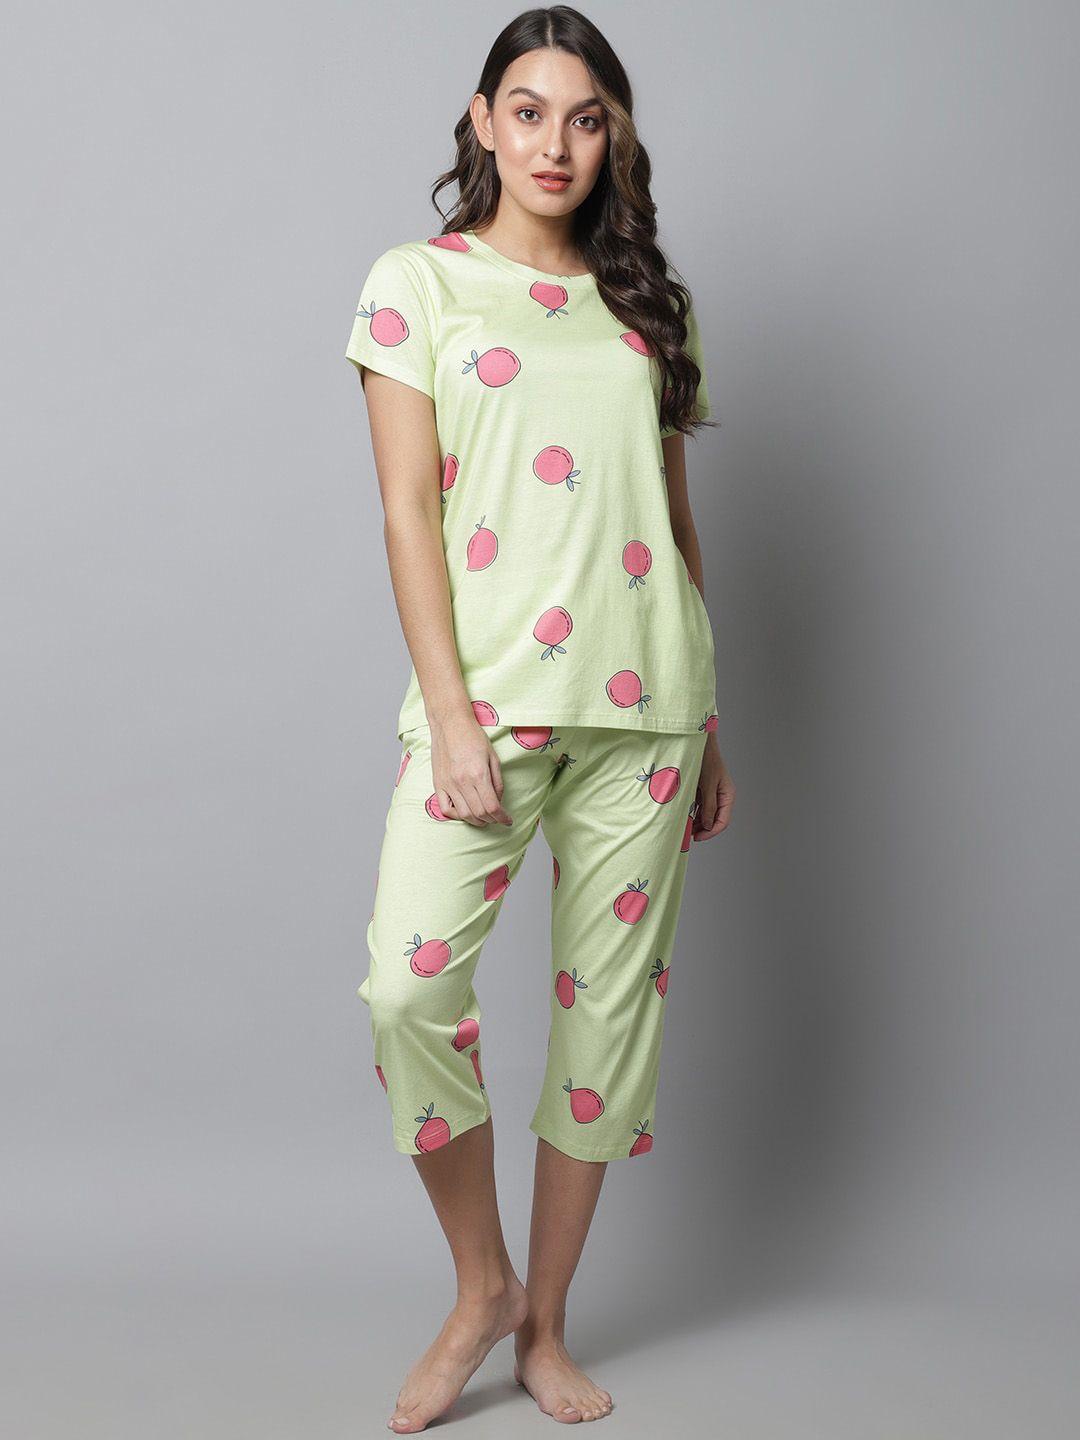 Kanvin Graphic Printed Night Suit